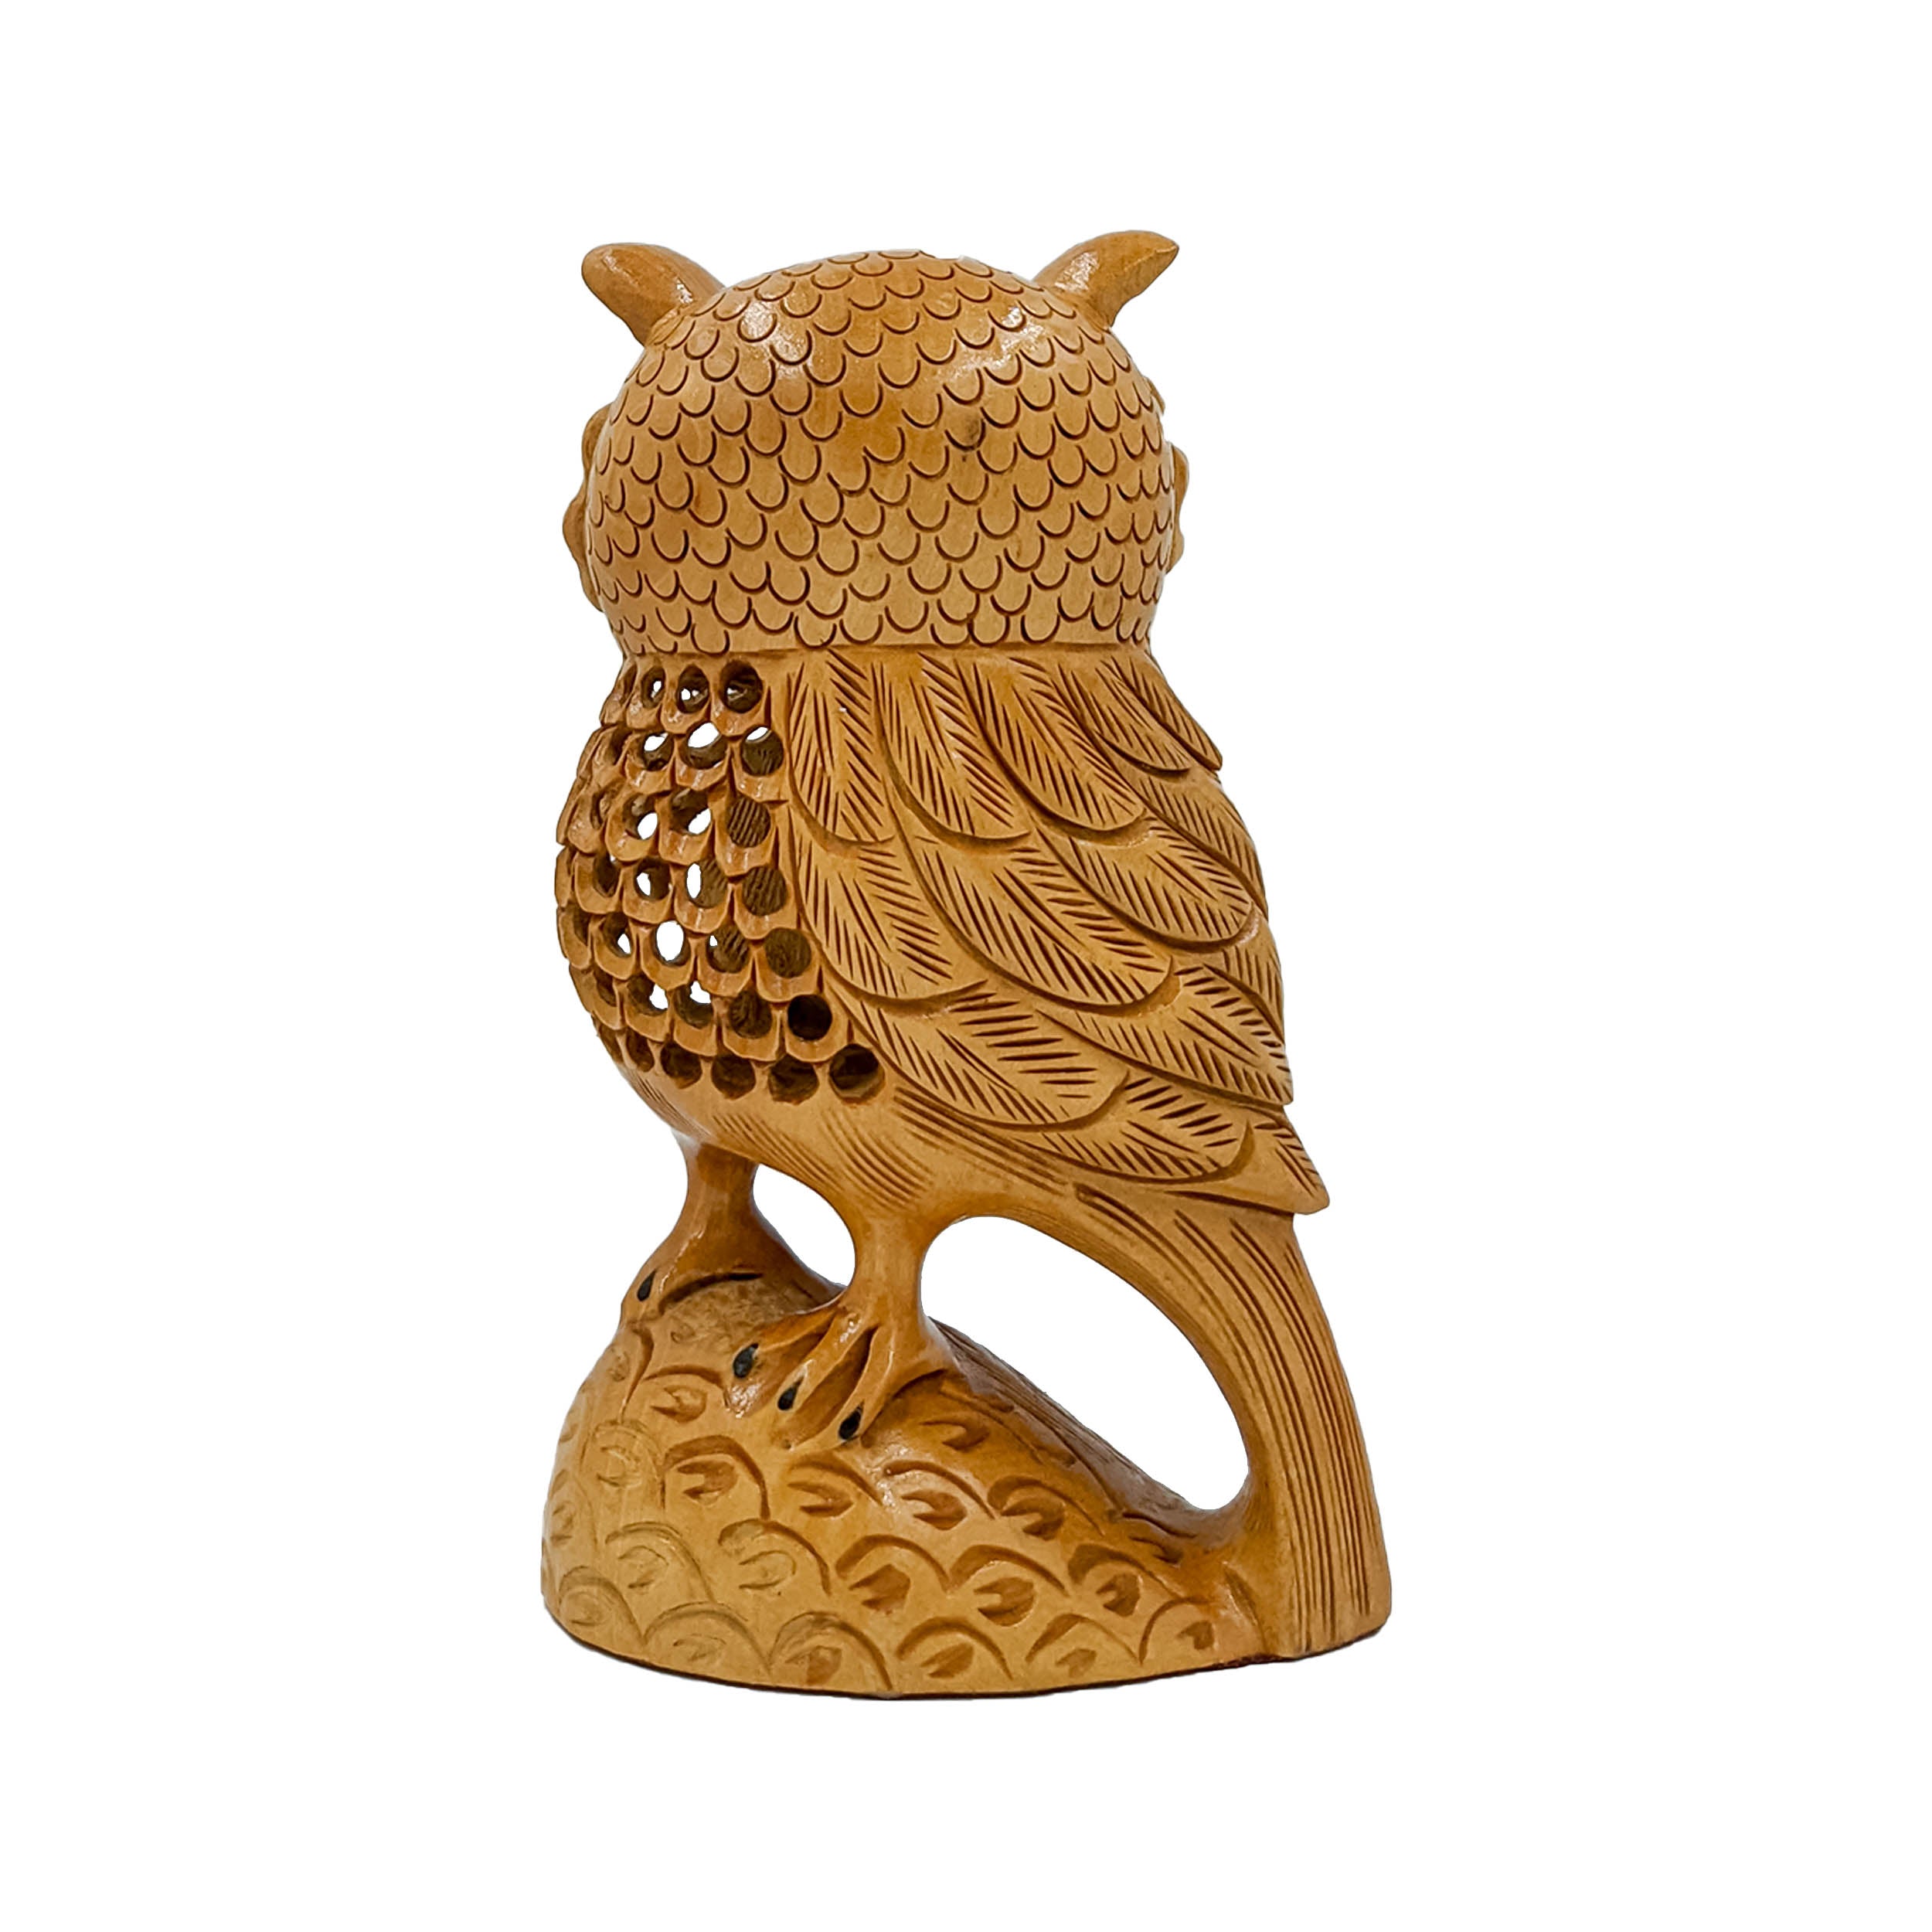 Intricately Carved for Elegant Home Décor Handmade Wooden Owl Statue